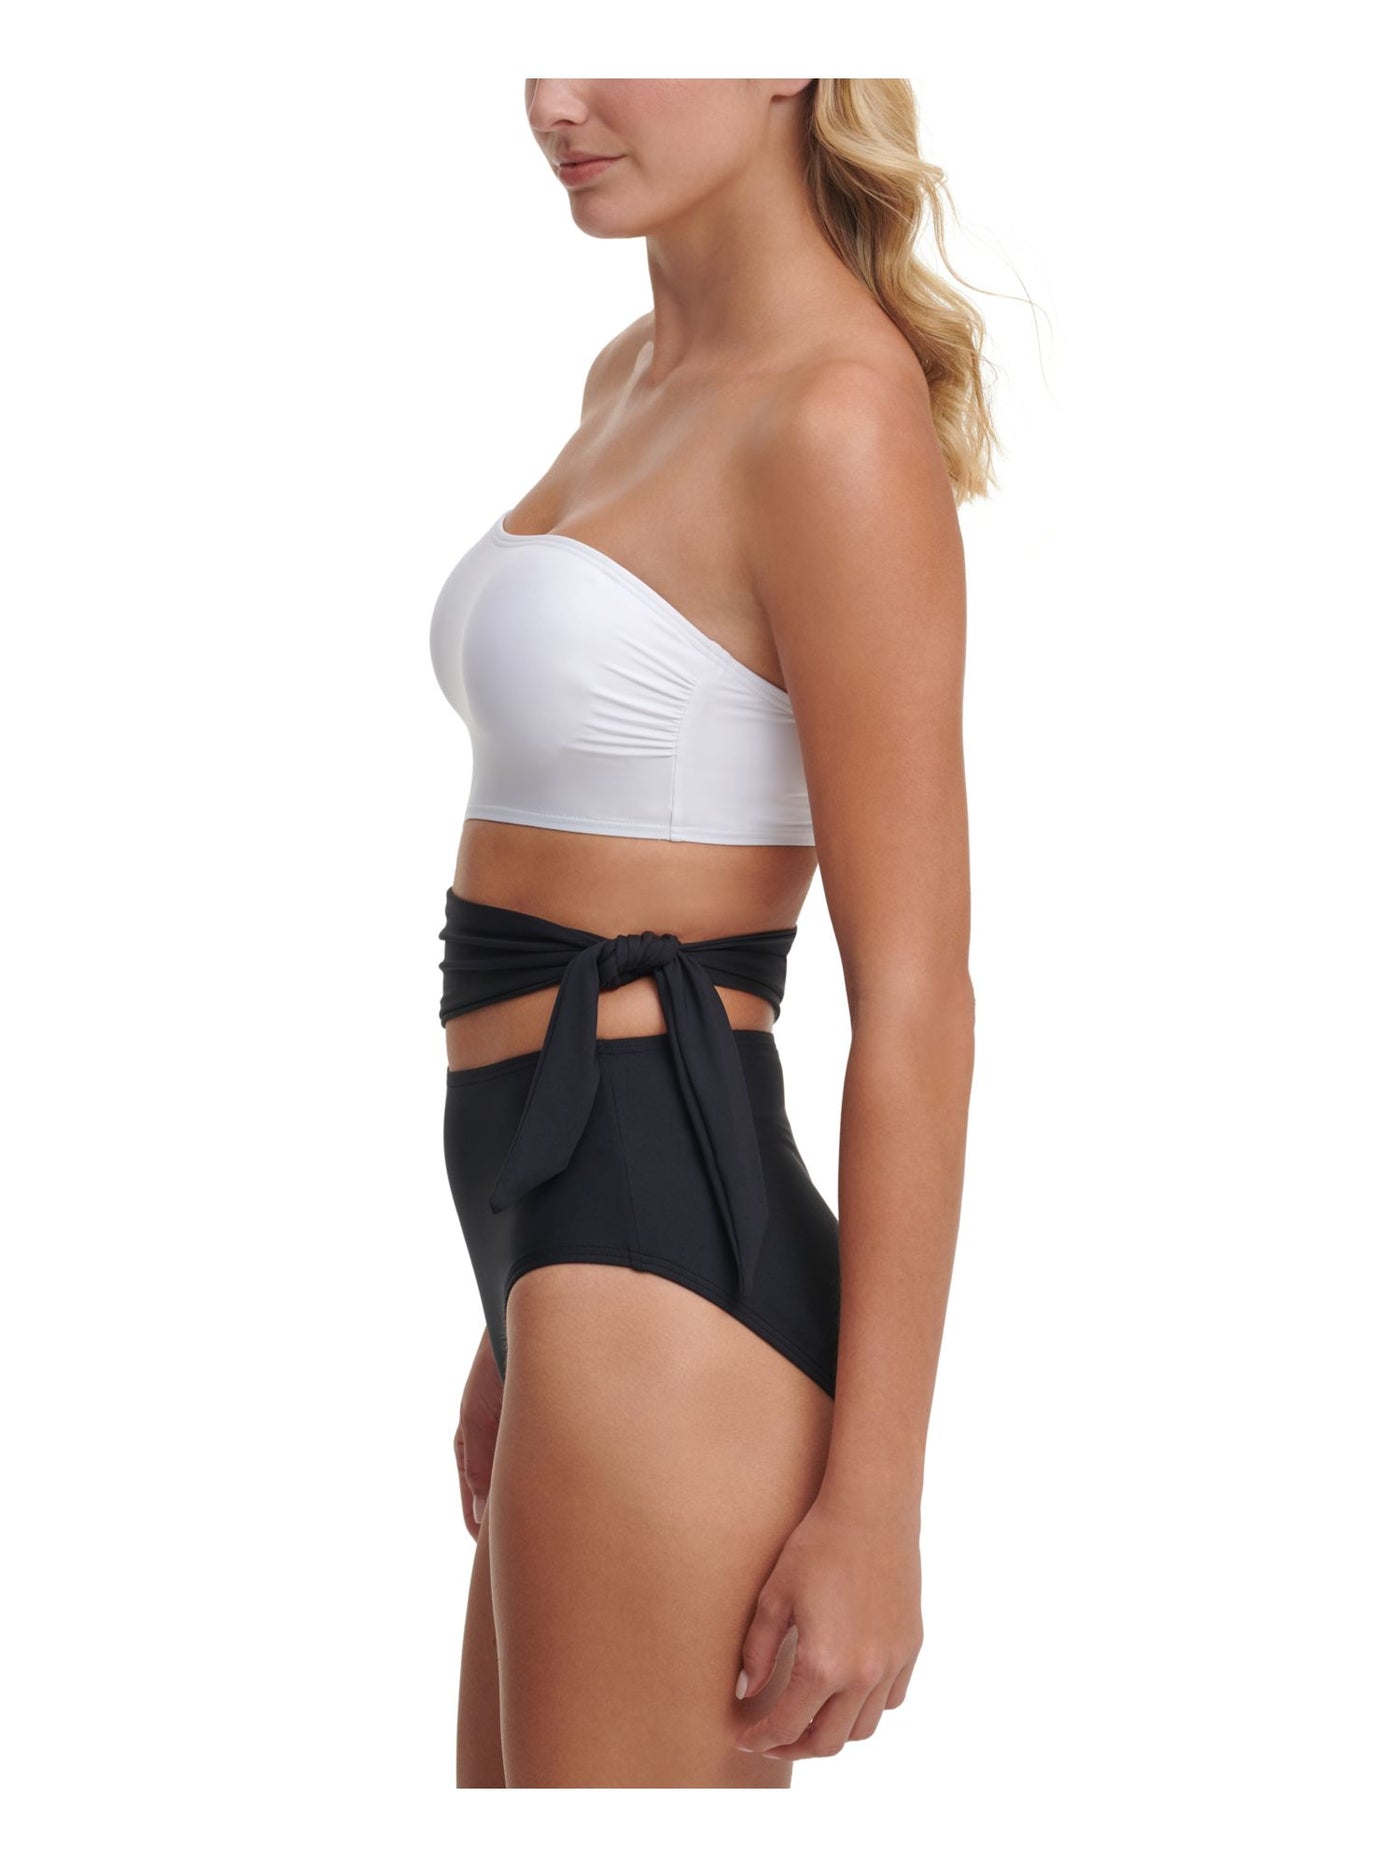 DKNY Women's White Color Block Stretch Convertible Lined Moderate Coverage Cutout Bandeau One Piece Swimsuit 12